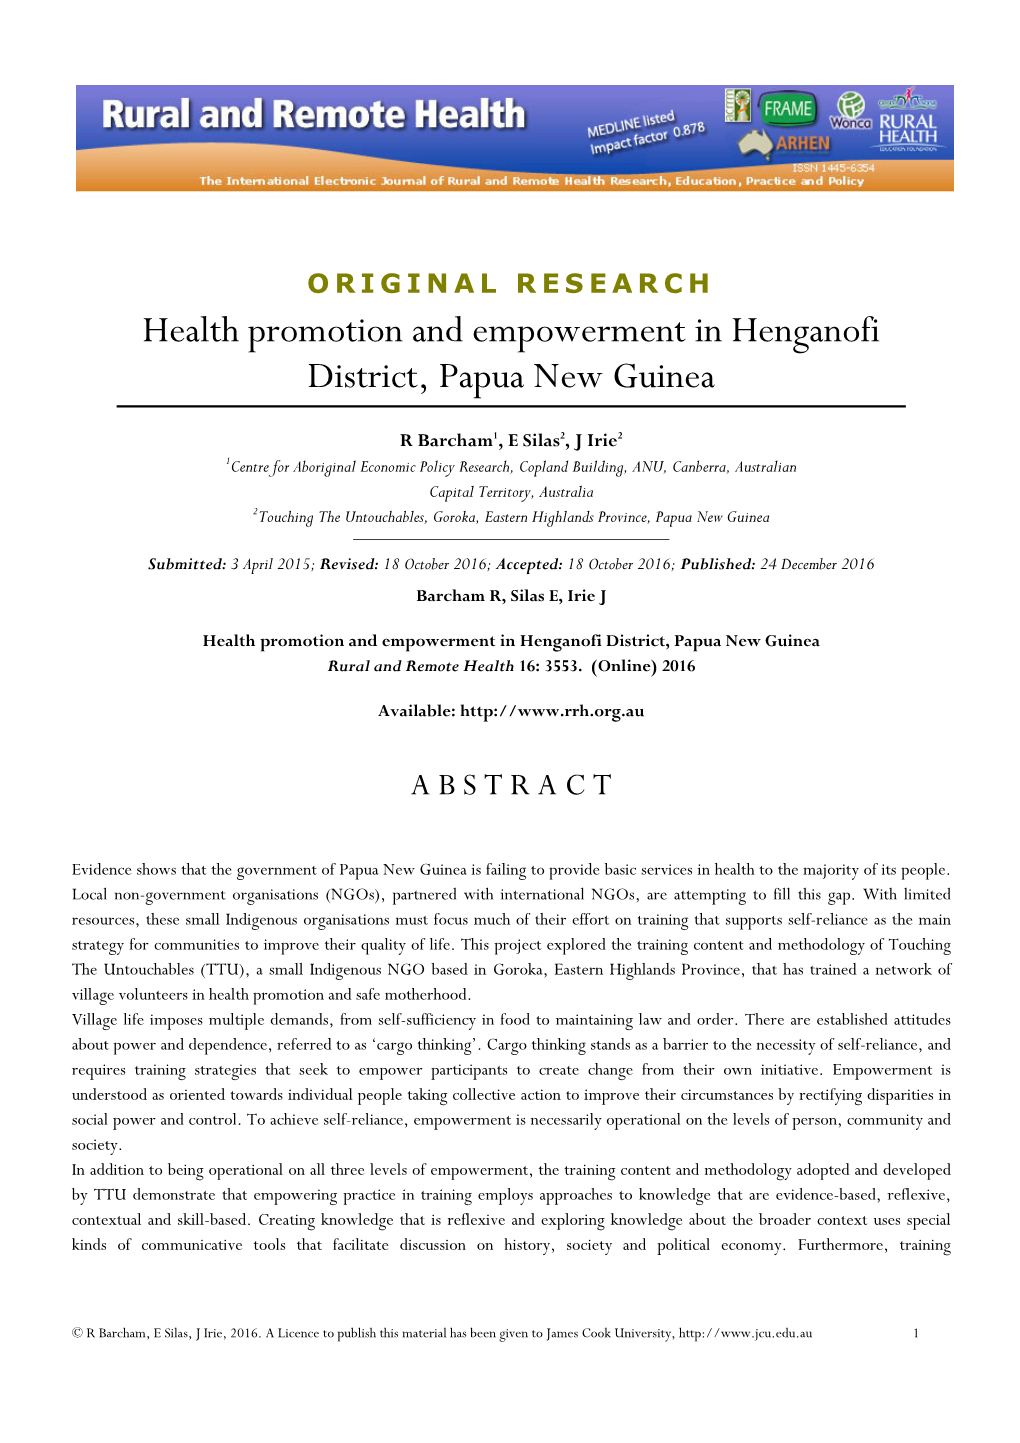 Health Promotion and Empowerment in Henganofi District, Papua New Guinea